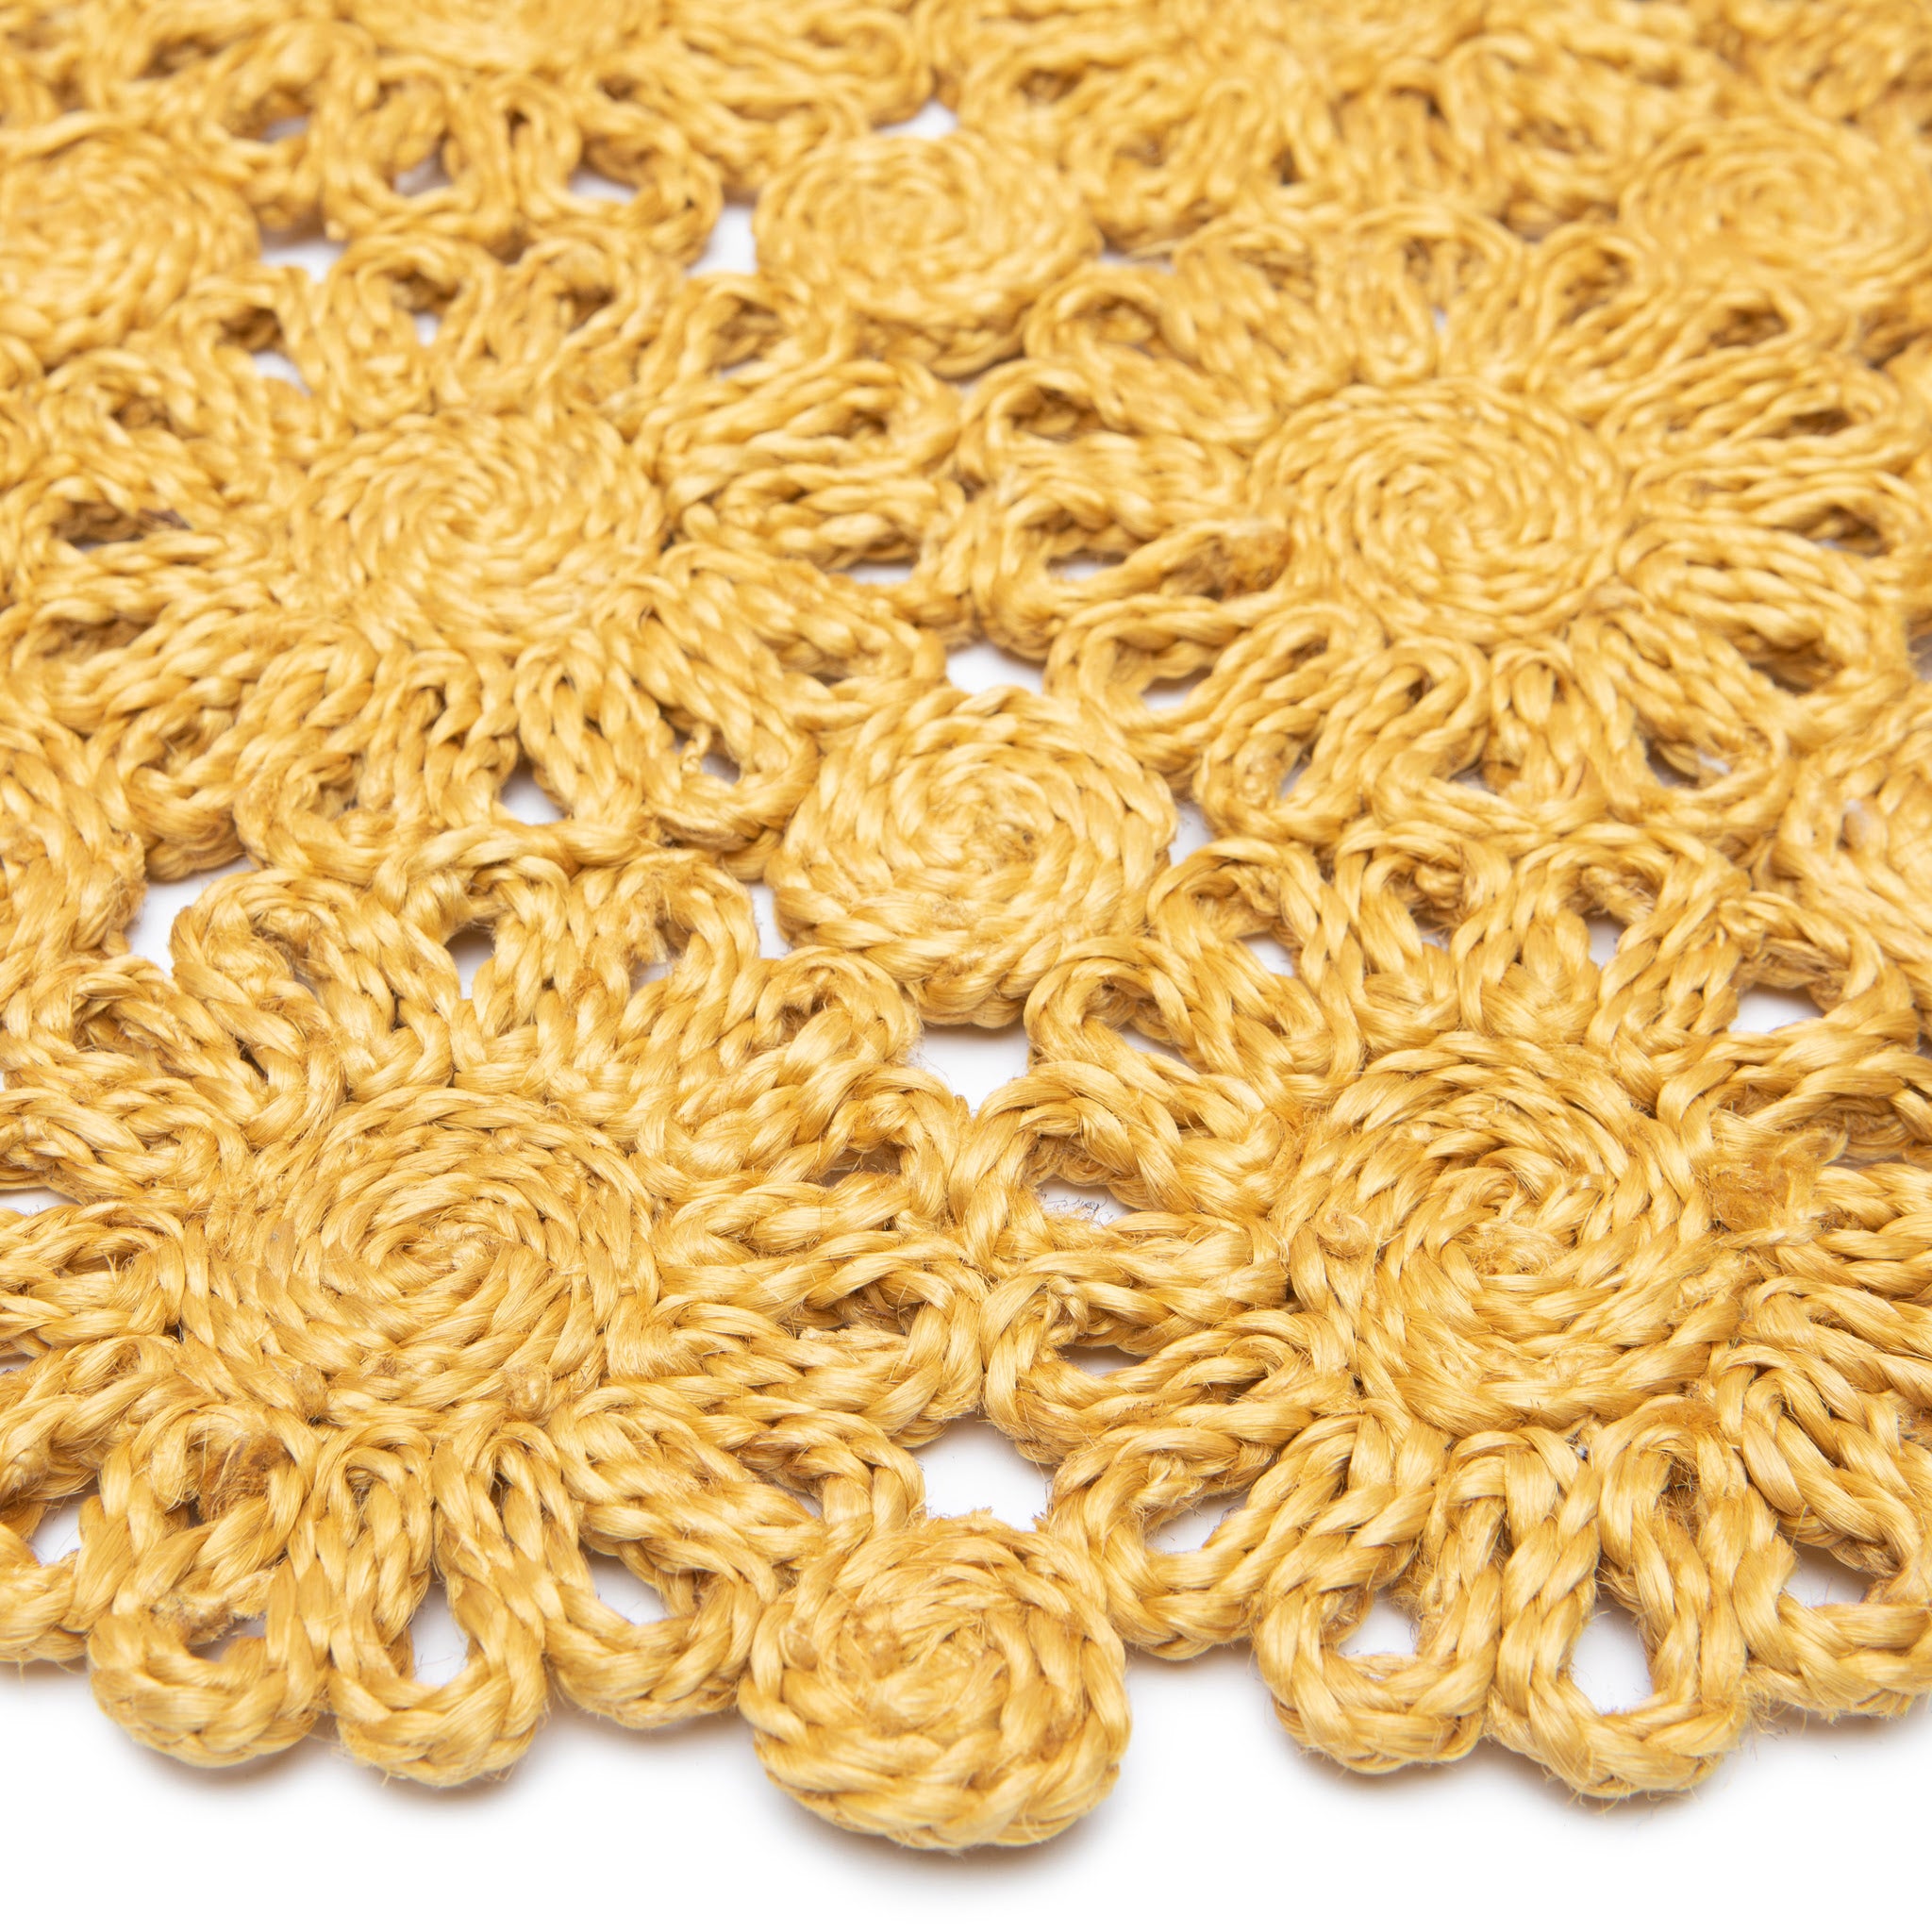 Daisy Jute 15" Round Placemat - Set of 4